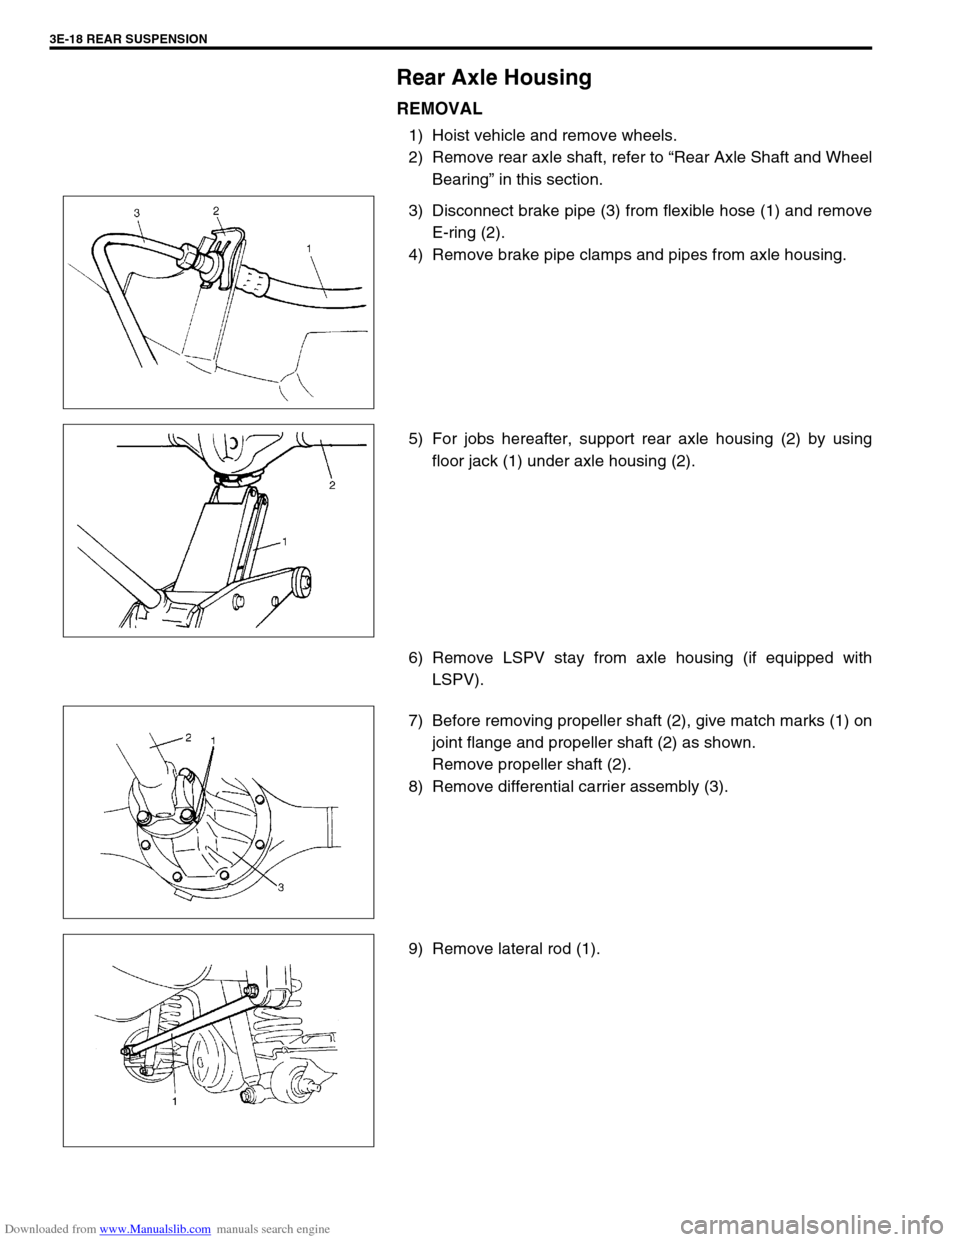 SUZUKI JIMNY 2005 3.G Service Owners Manual Downloaded from www.Manualslib.com manuals search engine 3E-18 REAR SUSPENSION
Rear Axle Housing
REMOVAL
1) Hoist vehicle and remove wheels.
2) Remove rear axle shaft, refer to “Rear Axle Shaft and 